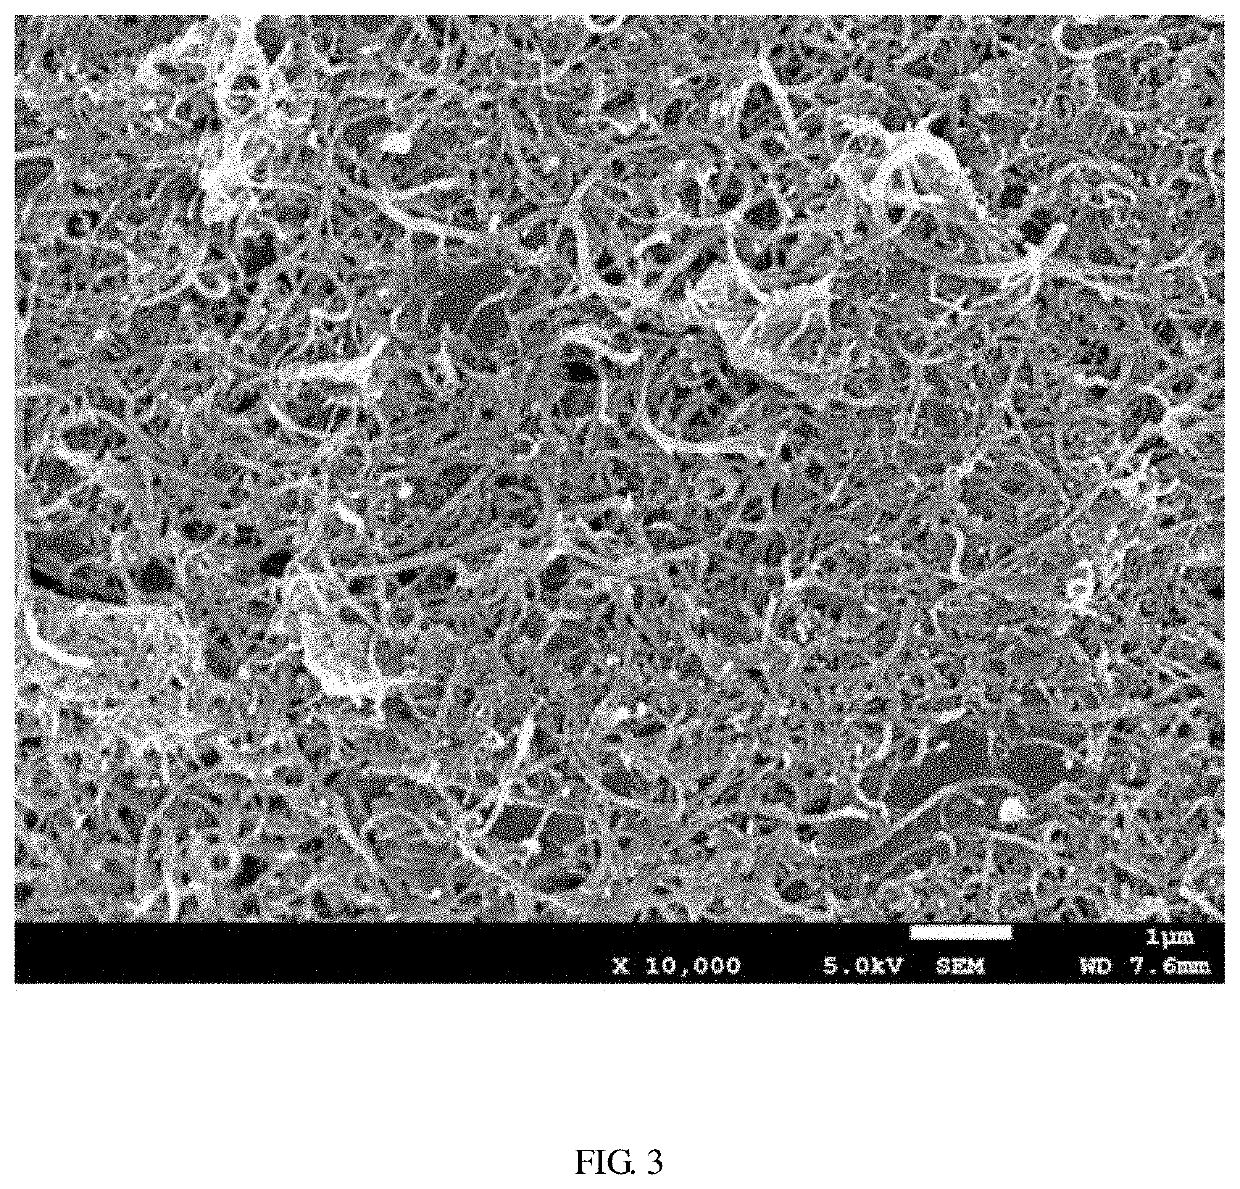 Conductive Carbon Material Dispersing Agent and High-Conductivity Slurry for Lithium Battery